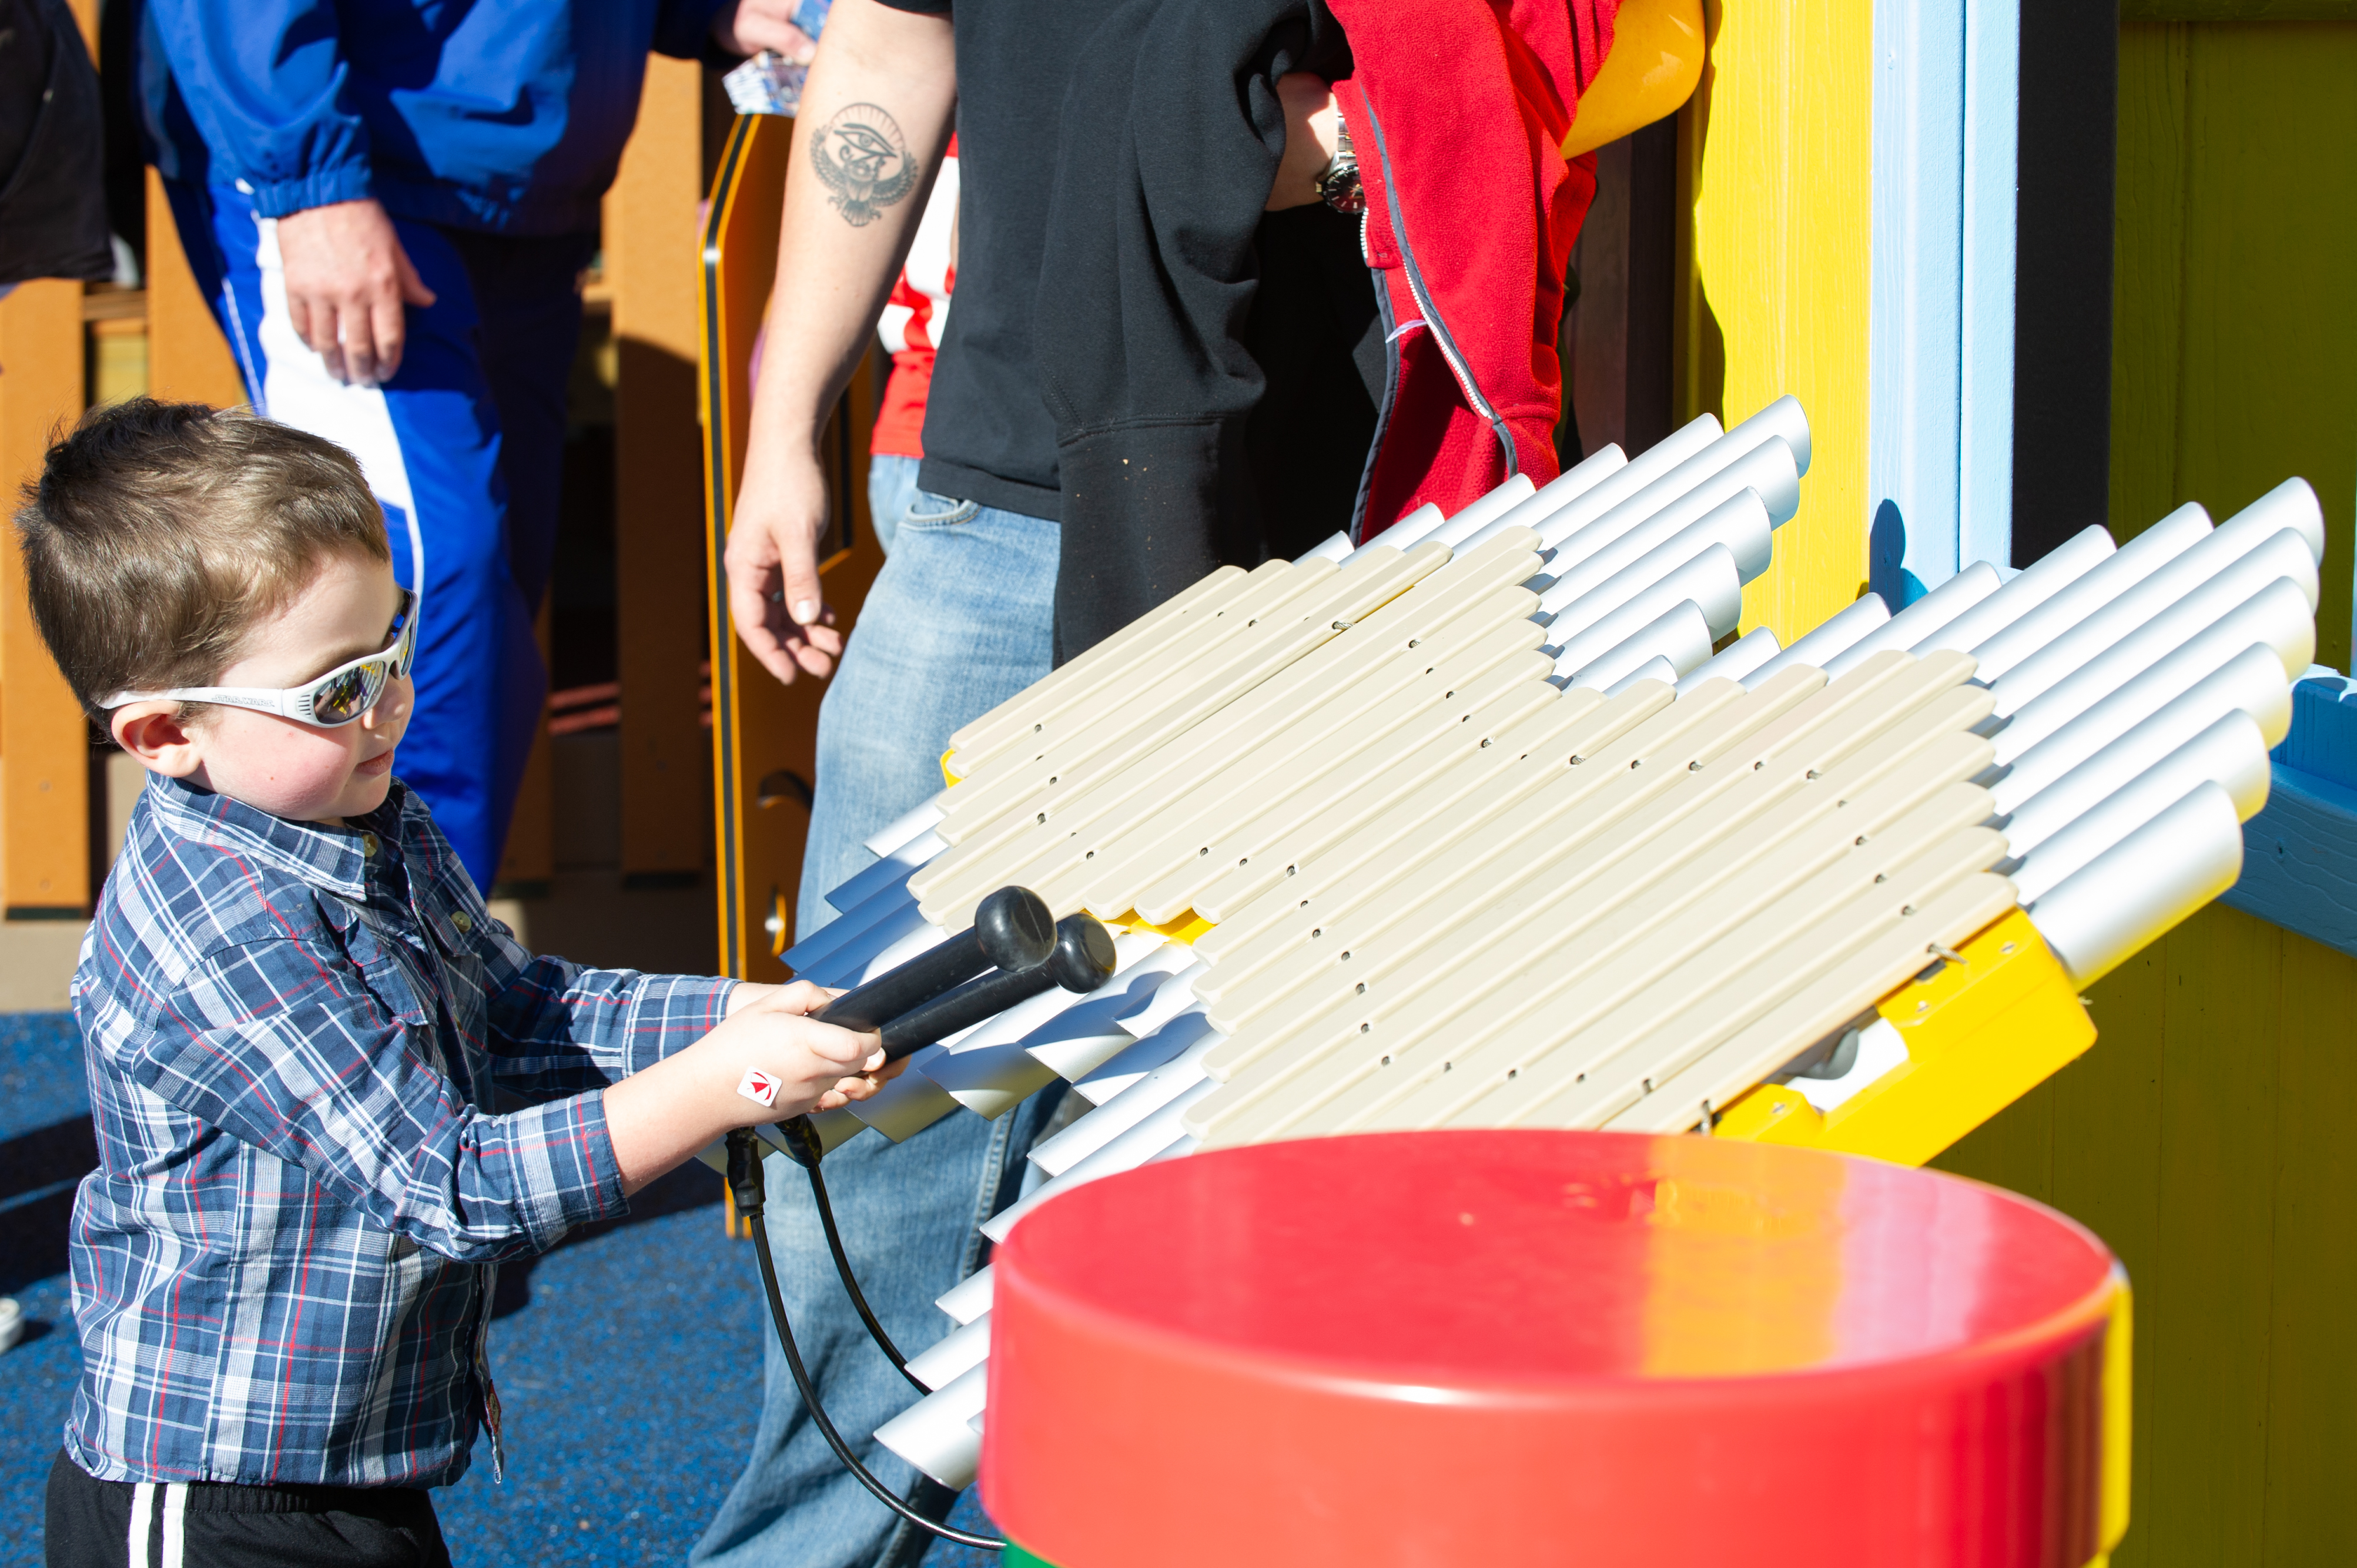 A child plays the musical feature at Project Playground.